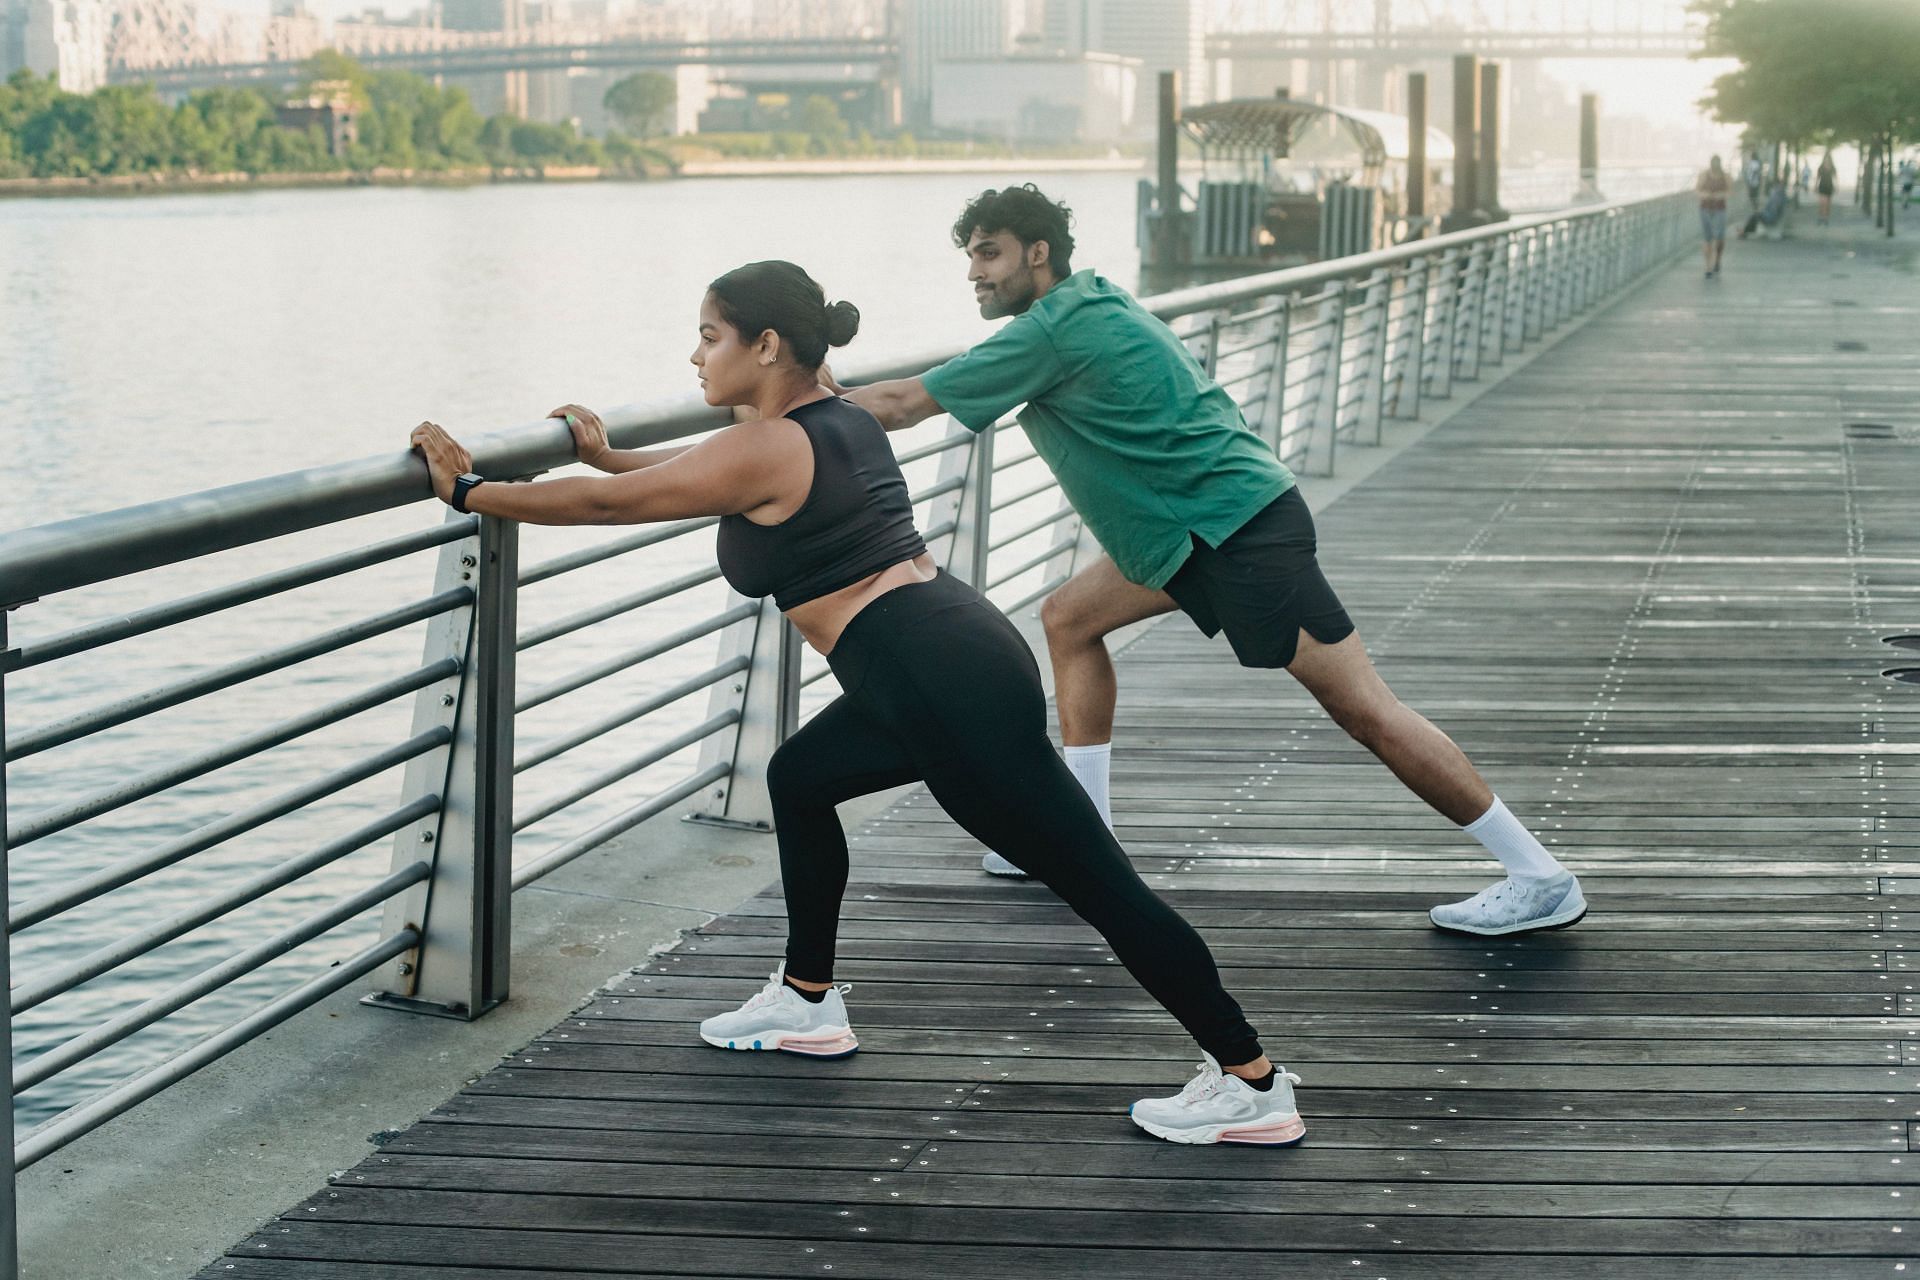 Warm-up before every workout is a must. (Image via Pexels / Ketut subiyanto)